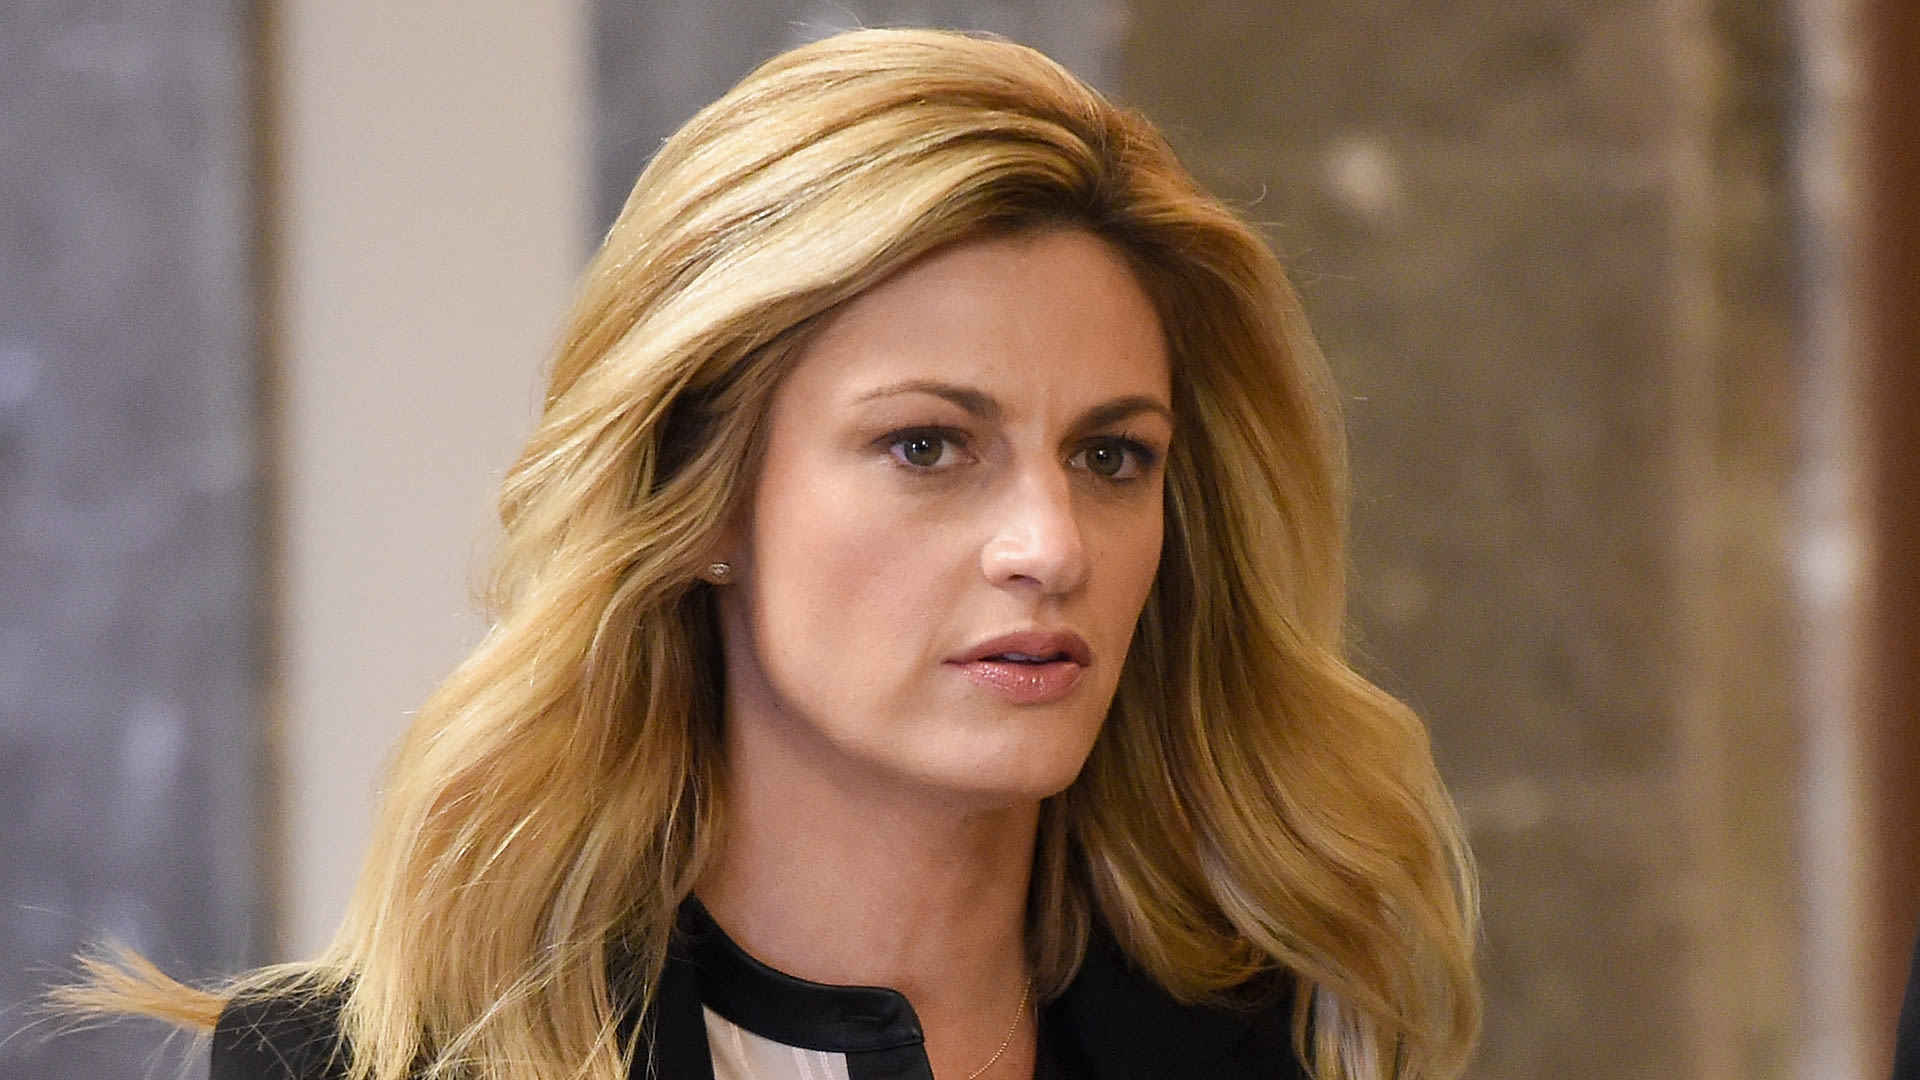 Erin Andrews reveals she broke down over cancer diagnosis and stalker hell